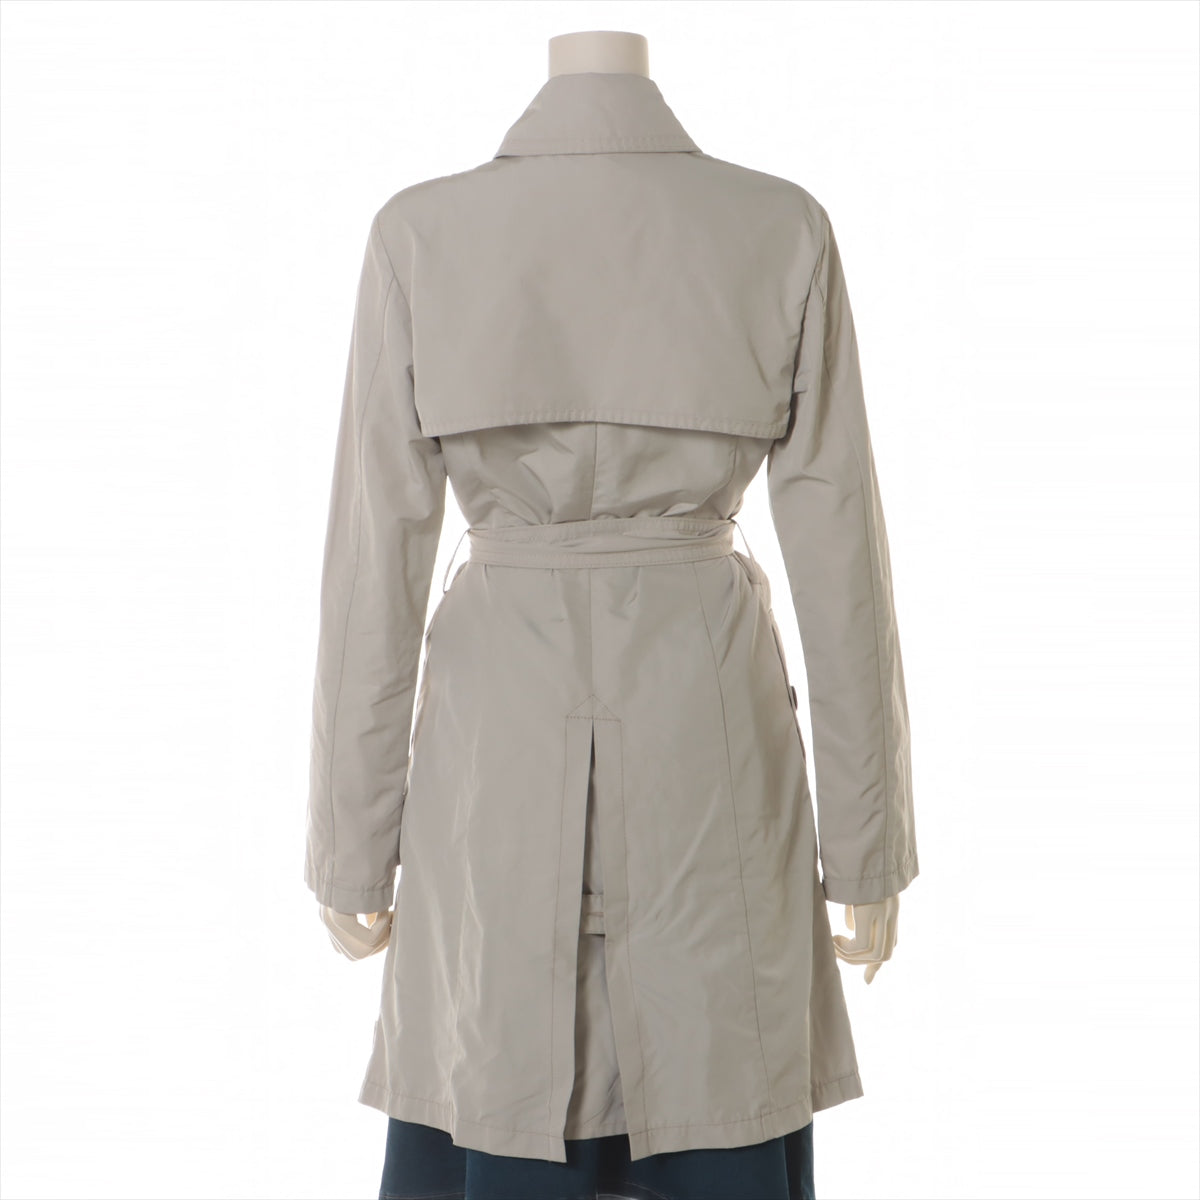 Moncler Polyester Trench coat 00 Ladies' Beige  49810  Z8E0214 [cleaned]